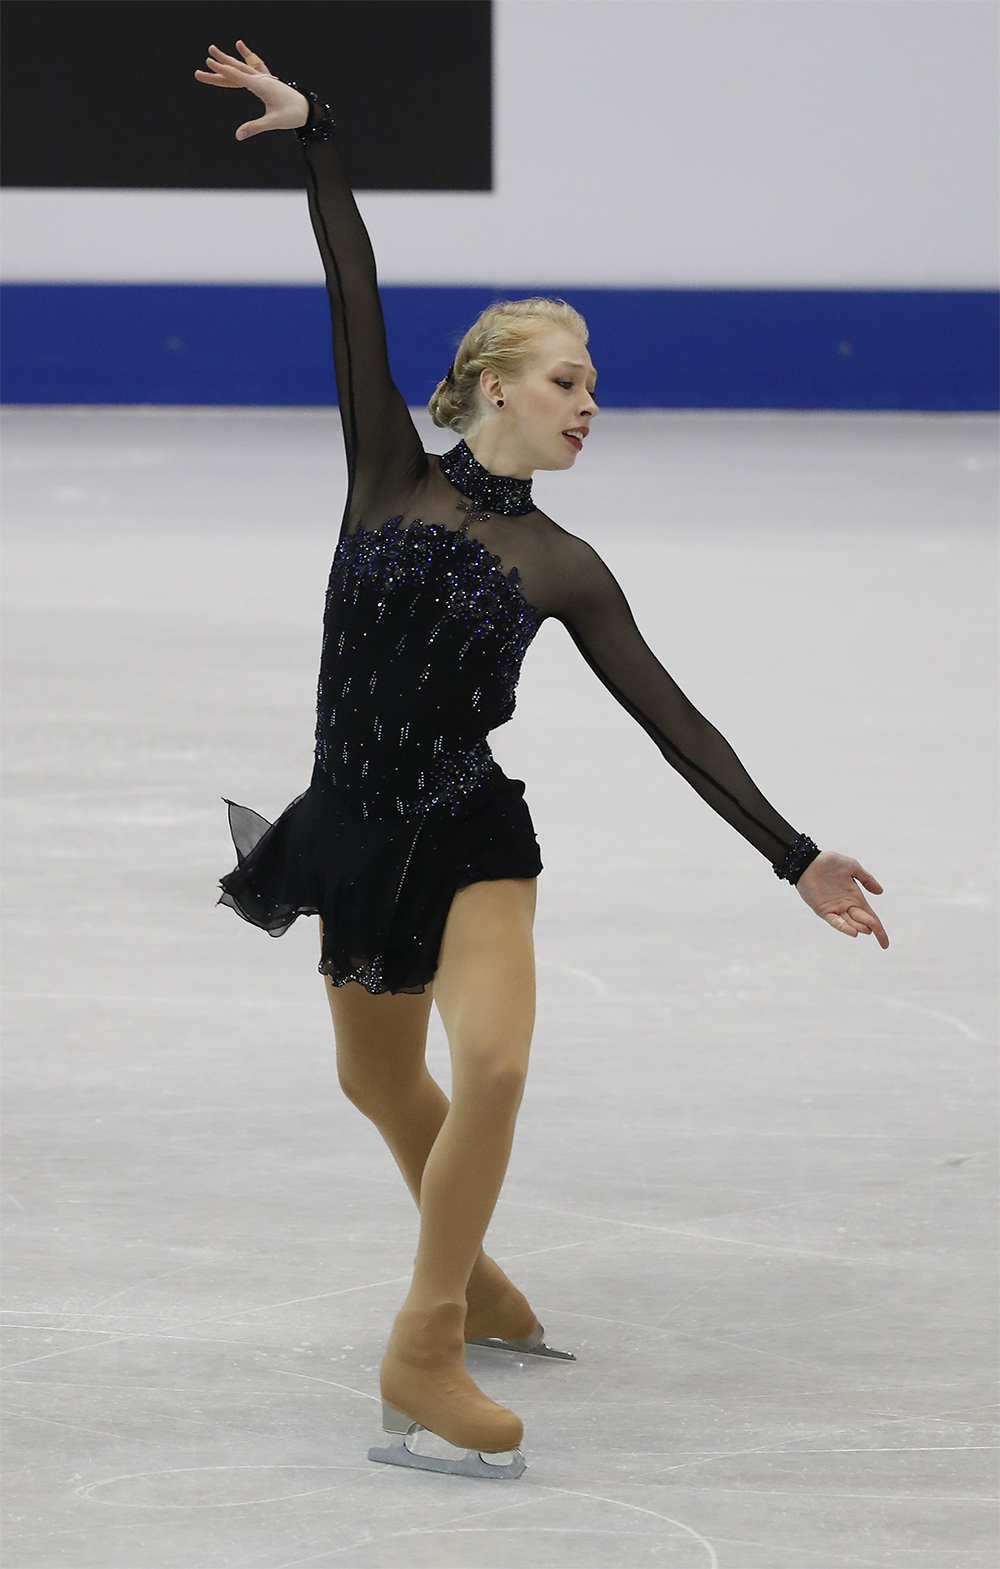 Bradie Tennell performs an ina bauer in competition.